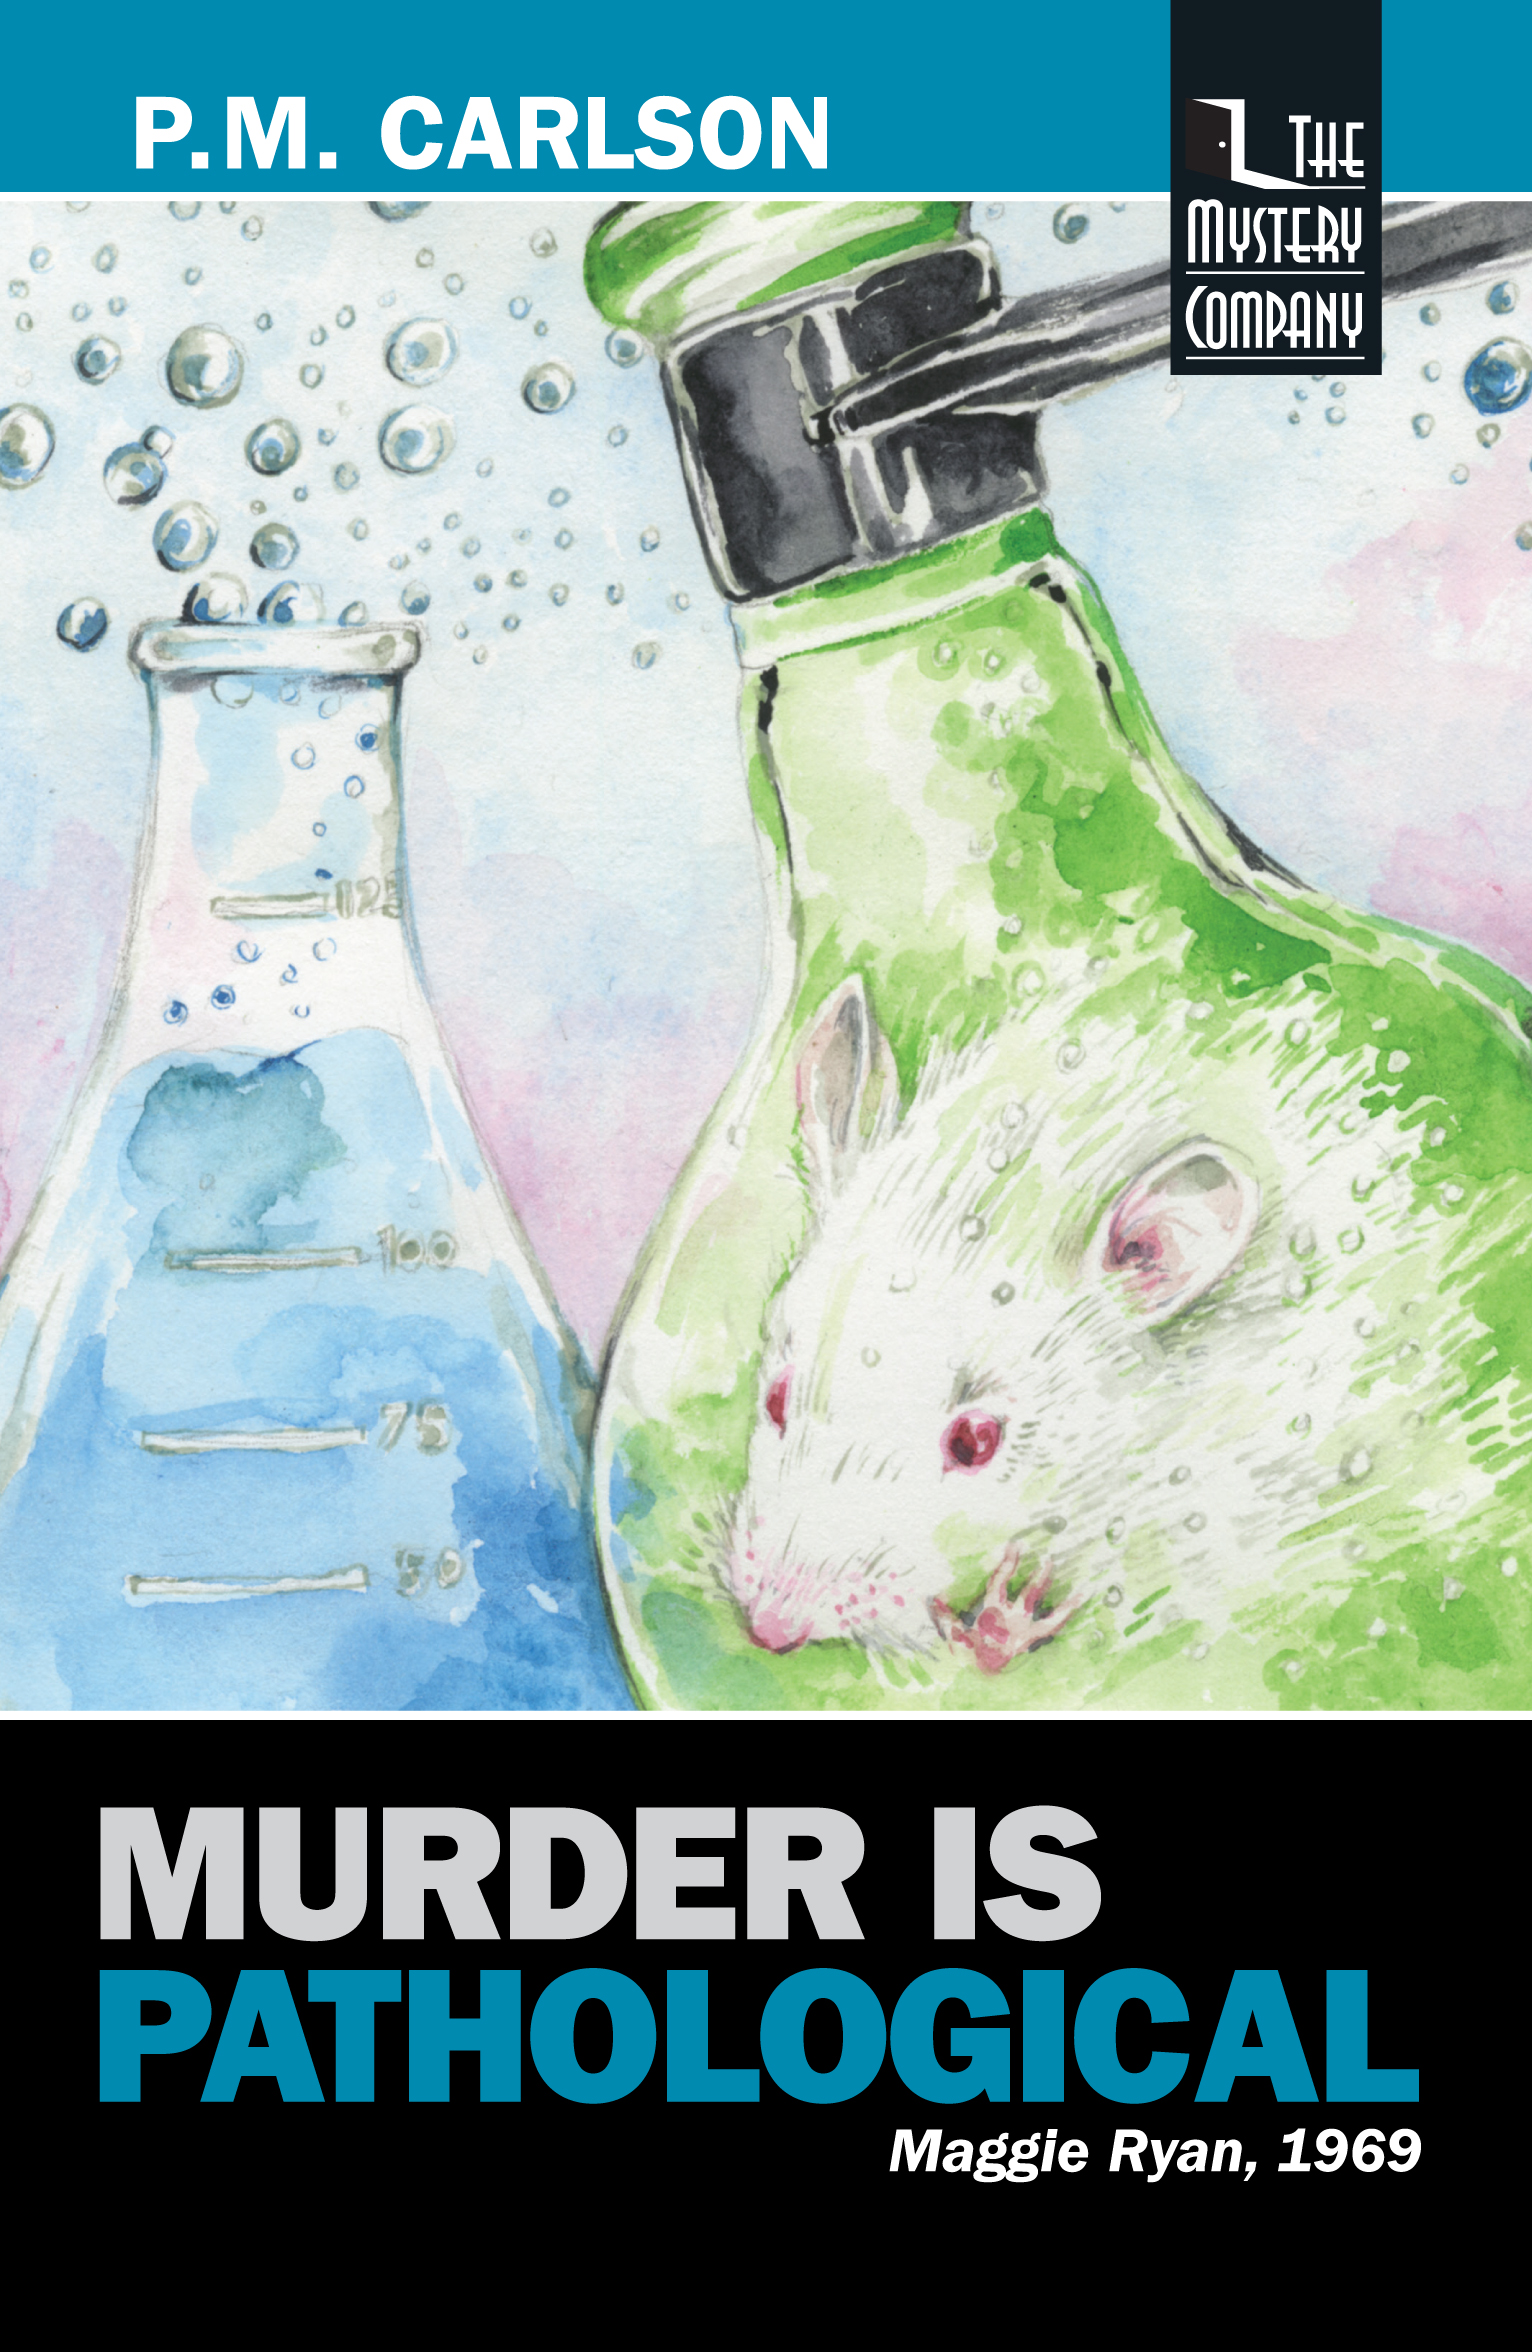 Murder Is Pathological by P.M. Carlson